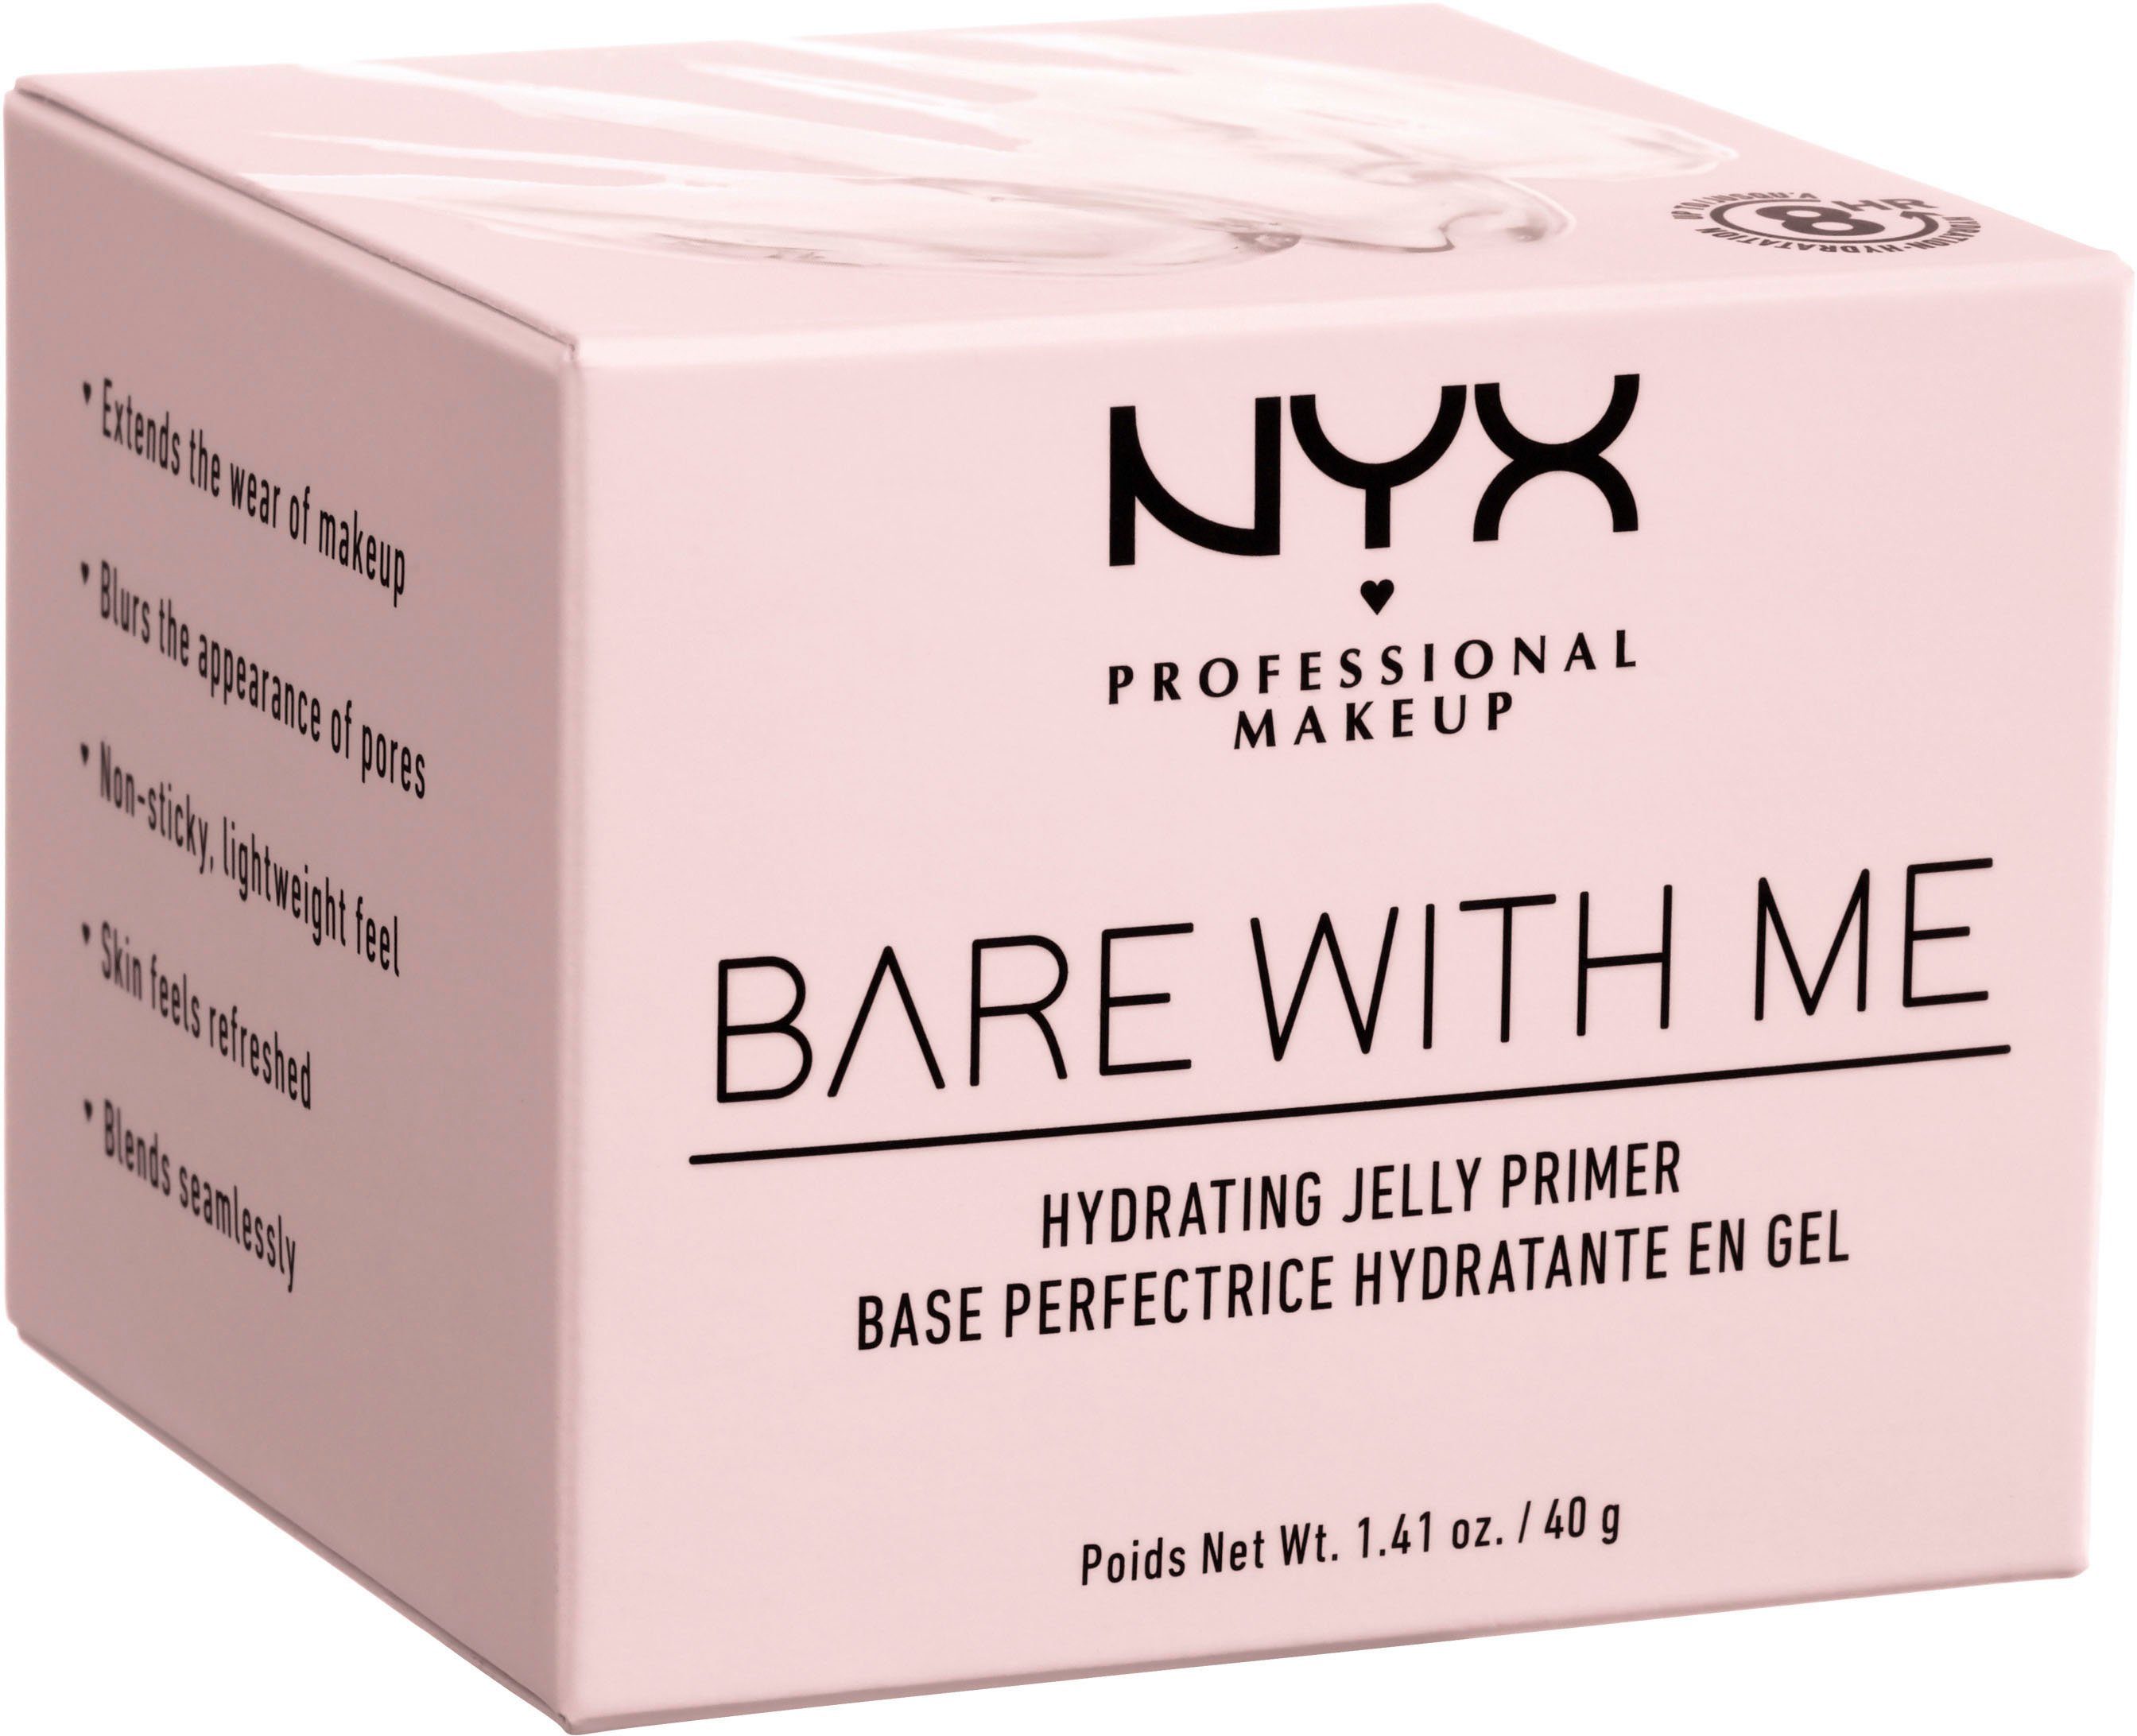 Me Bare Makeup Primer Primer Professional NYX Hydrating With Jelly NYX